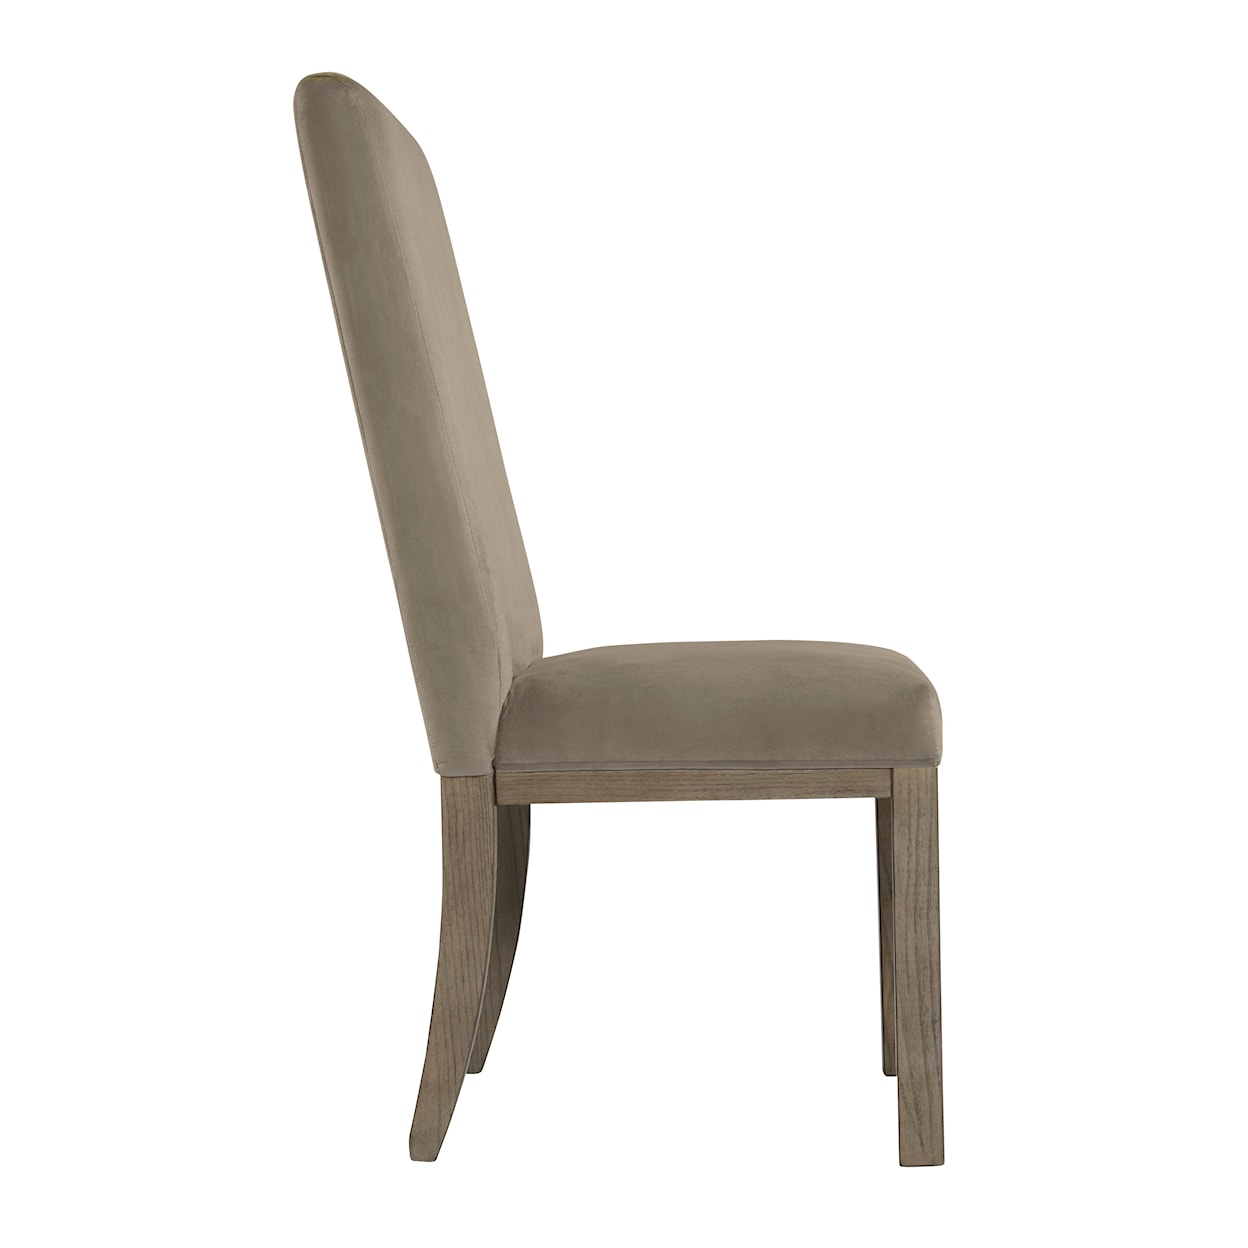 Signature Design by Ashley Furniture Chrestner Dining Chair